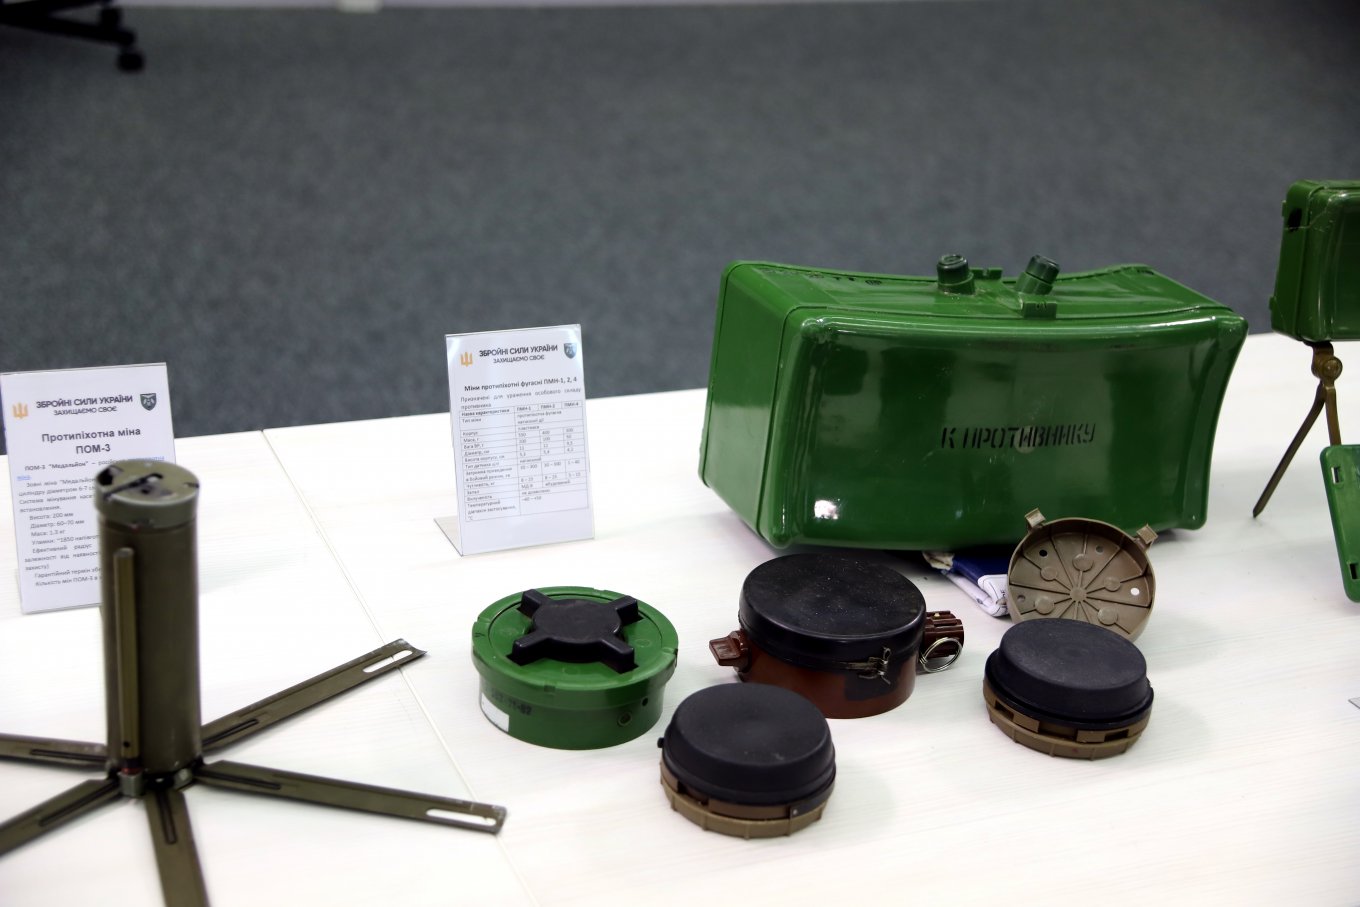 The production models of russian mines and improvised explosive devices Defense Express